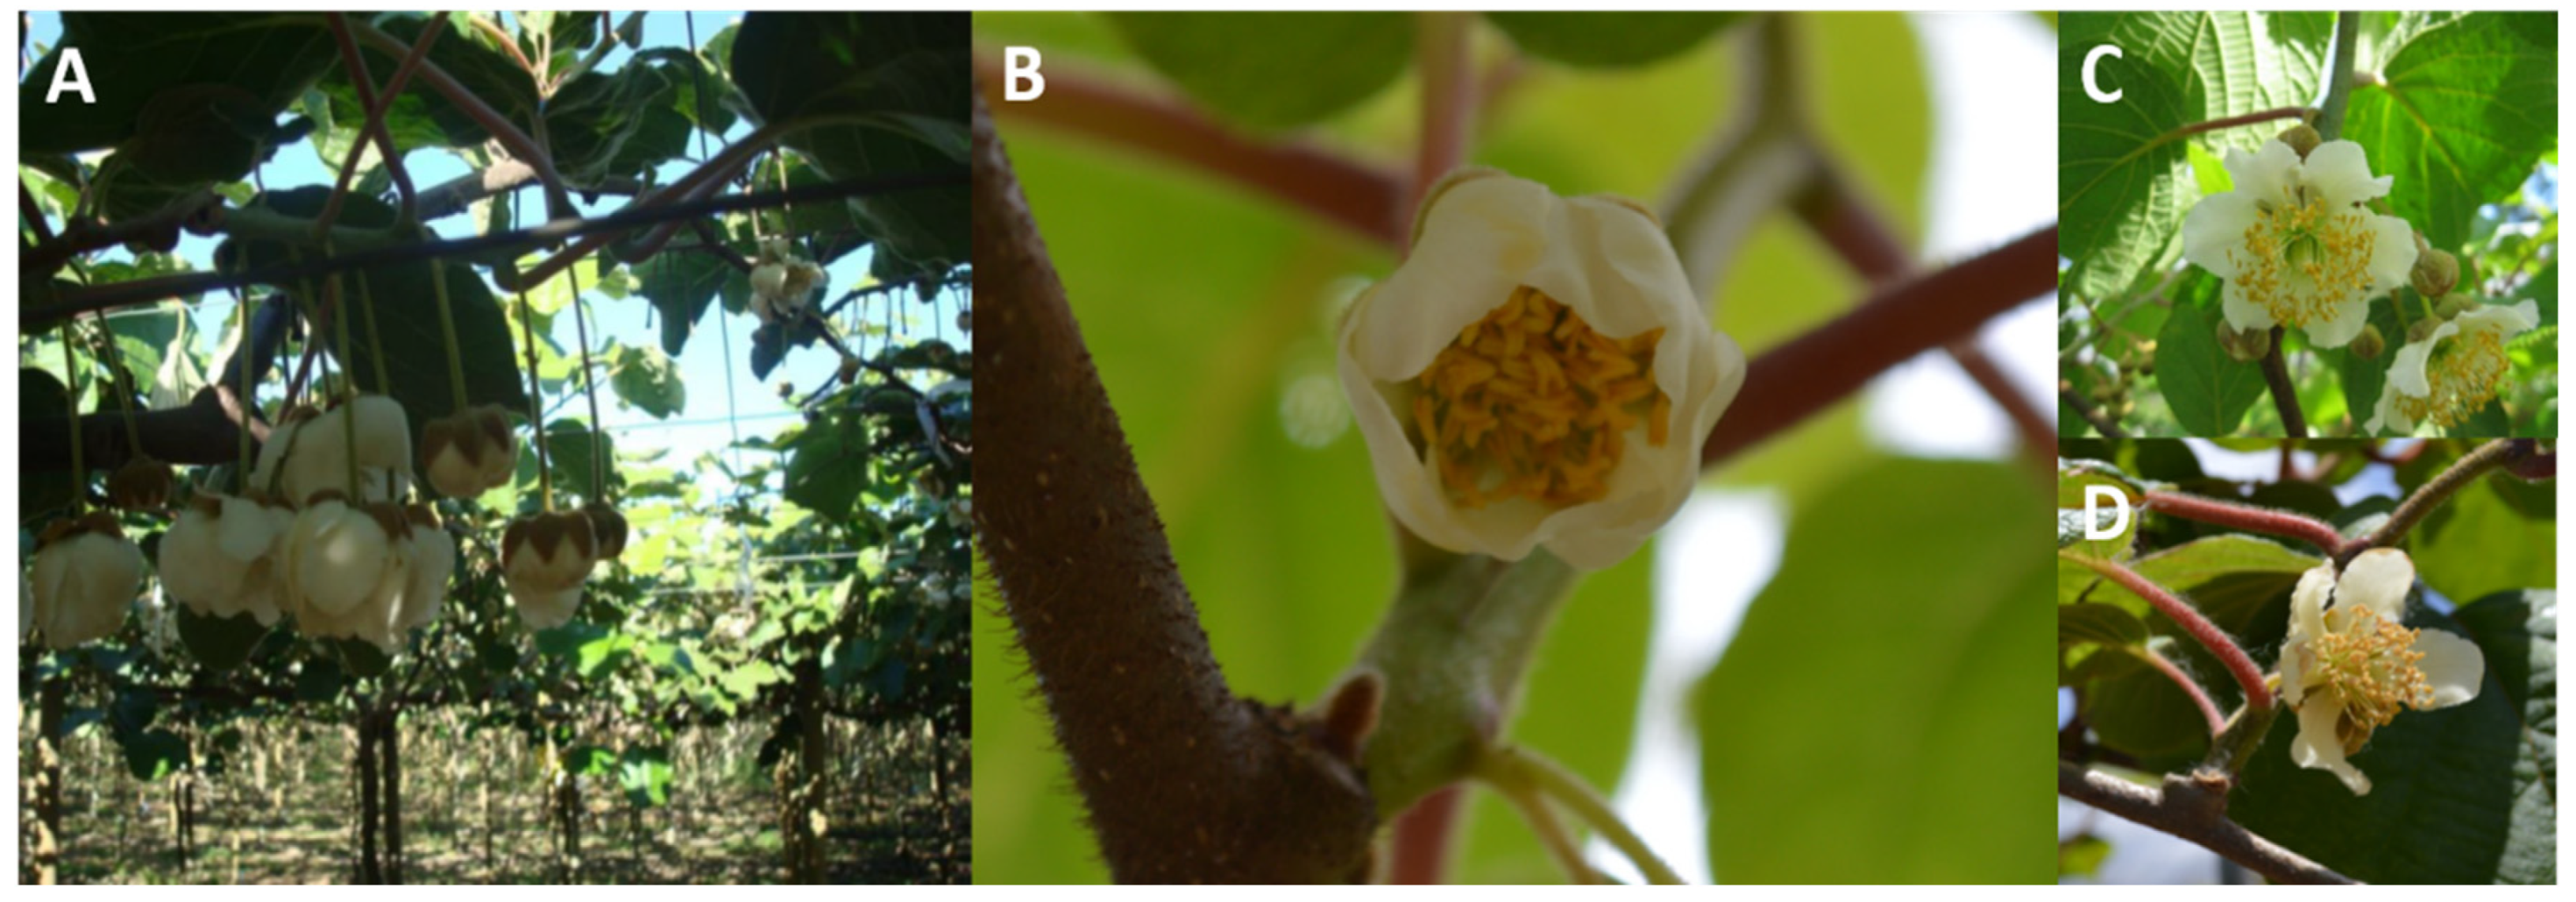 Three Girls Xxnx - Horticulturae | Free Full-Text | Transcriptomic Analysis of Sex-Associated  DEGs in Female and Male Flowers of Kiwifruit (Actinidia deliciosa [A. Chev]  C. F. Liang & A. R. Ferguson)